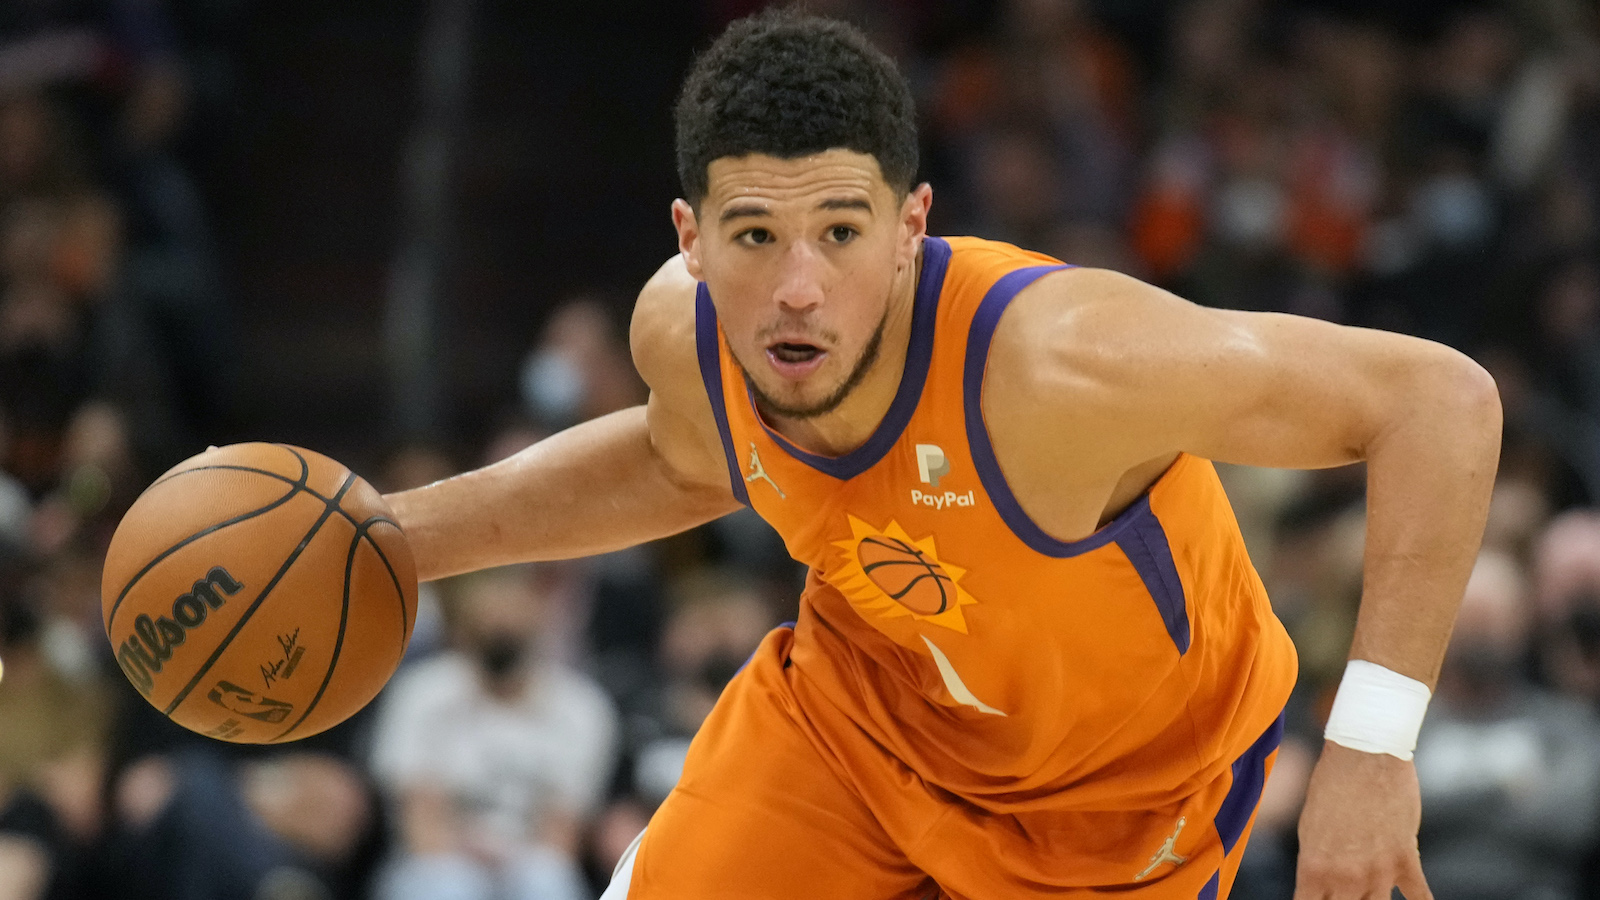 By winning Game 7, Suns' Devin Booker can turn imagination into